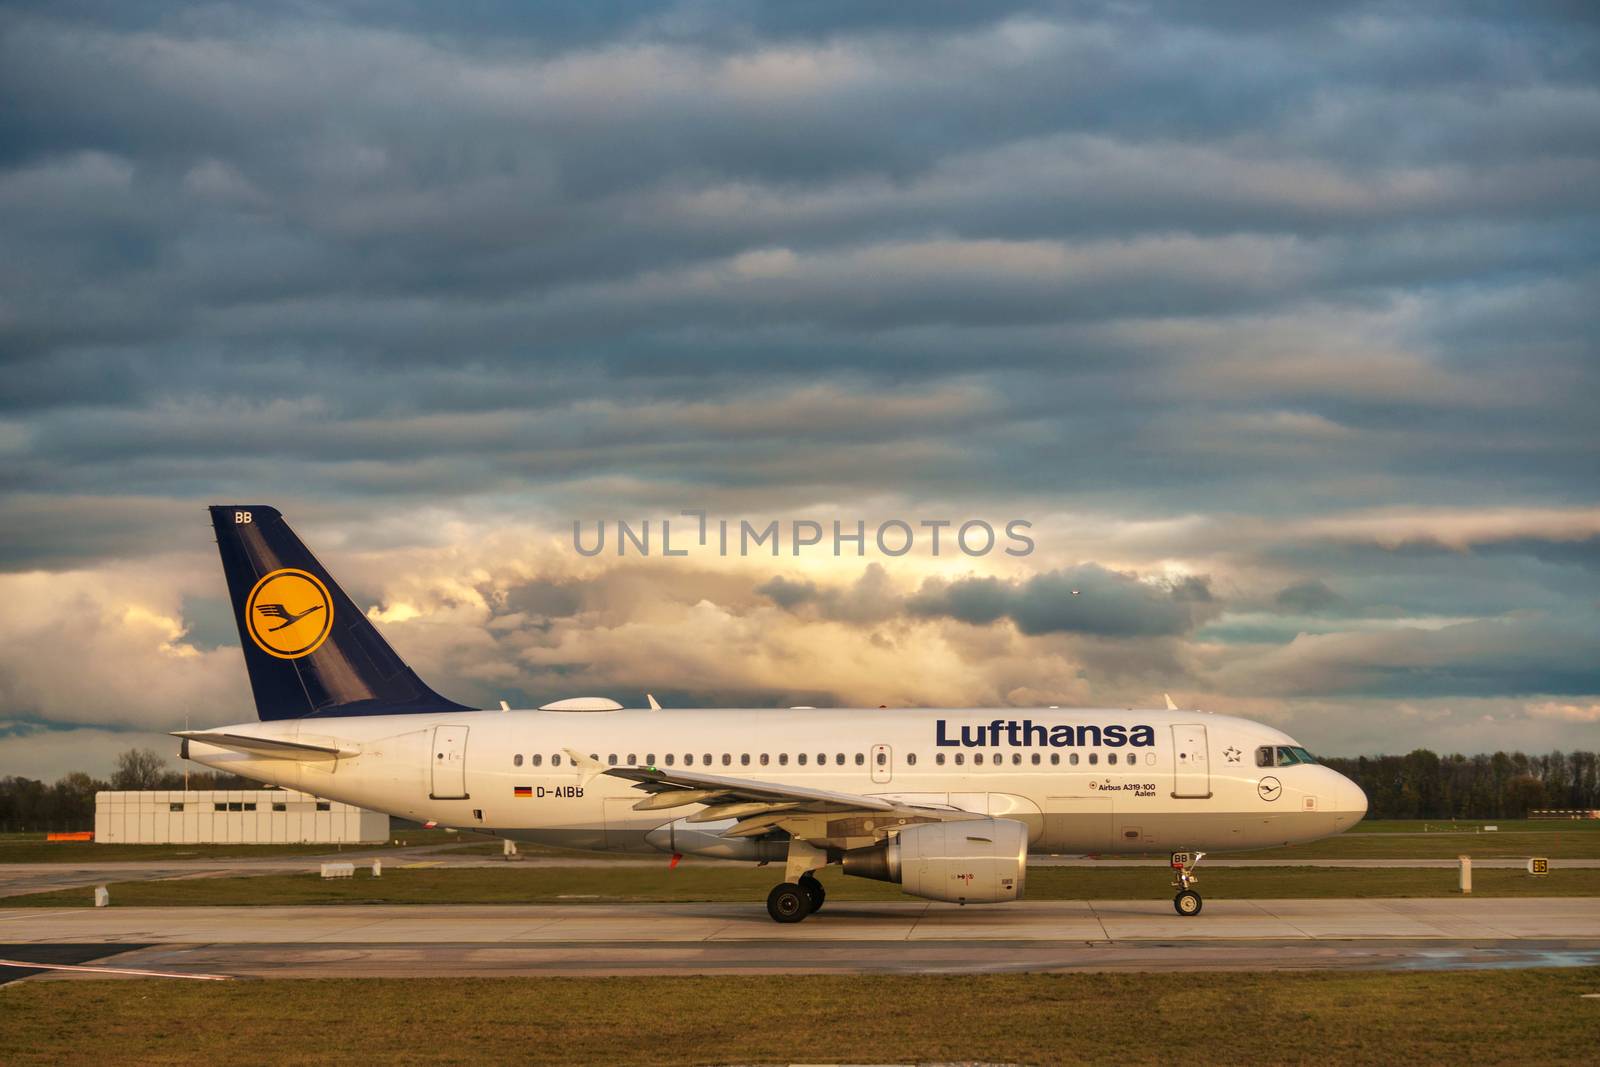 GERMANY, MUNICH - CIRCA 2020: Lufthansa Airline Airplane getting ready for landing or take off at Munich airport with dramatic sky in the background. Travel during coronavirus pandemic concept